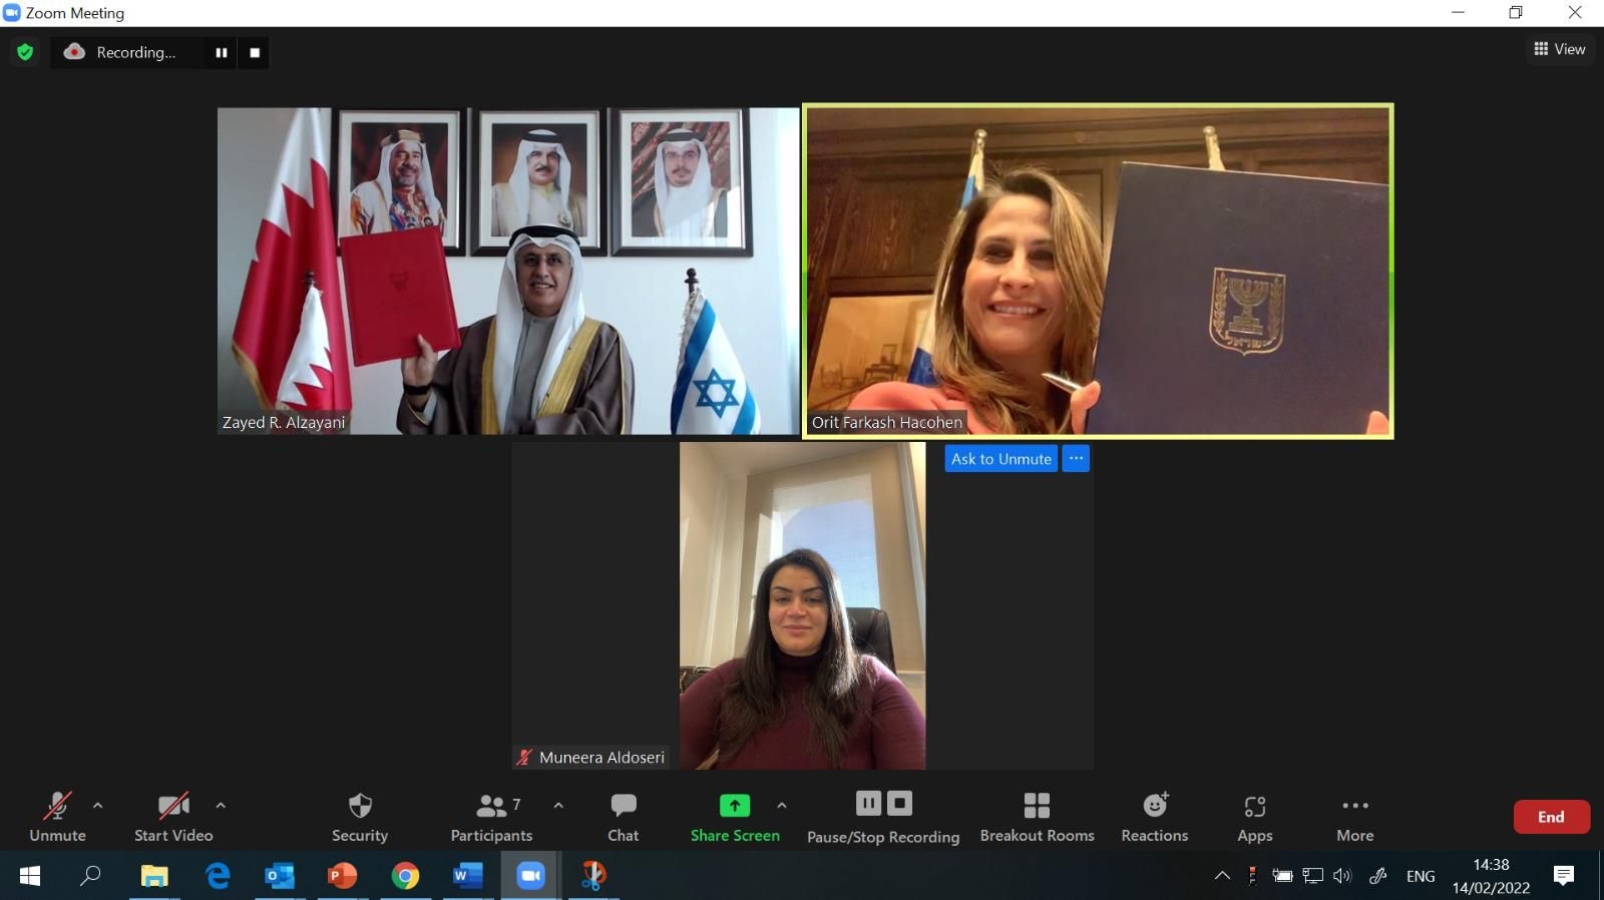 Bahraini Minister Zayed R. Alzayani and Israel’s Israeli Innovation, Science and Technology Minister Orit Farkash-Hacohen virtually sign the new agreement between the two countries.